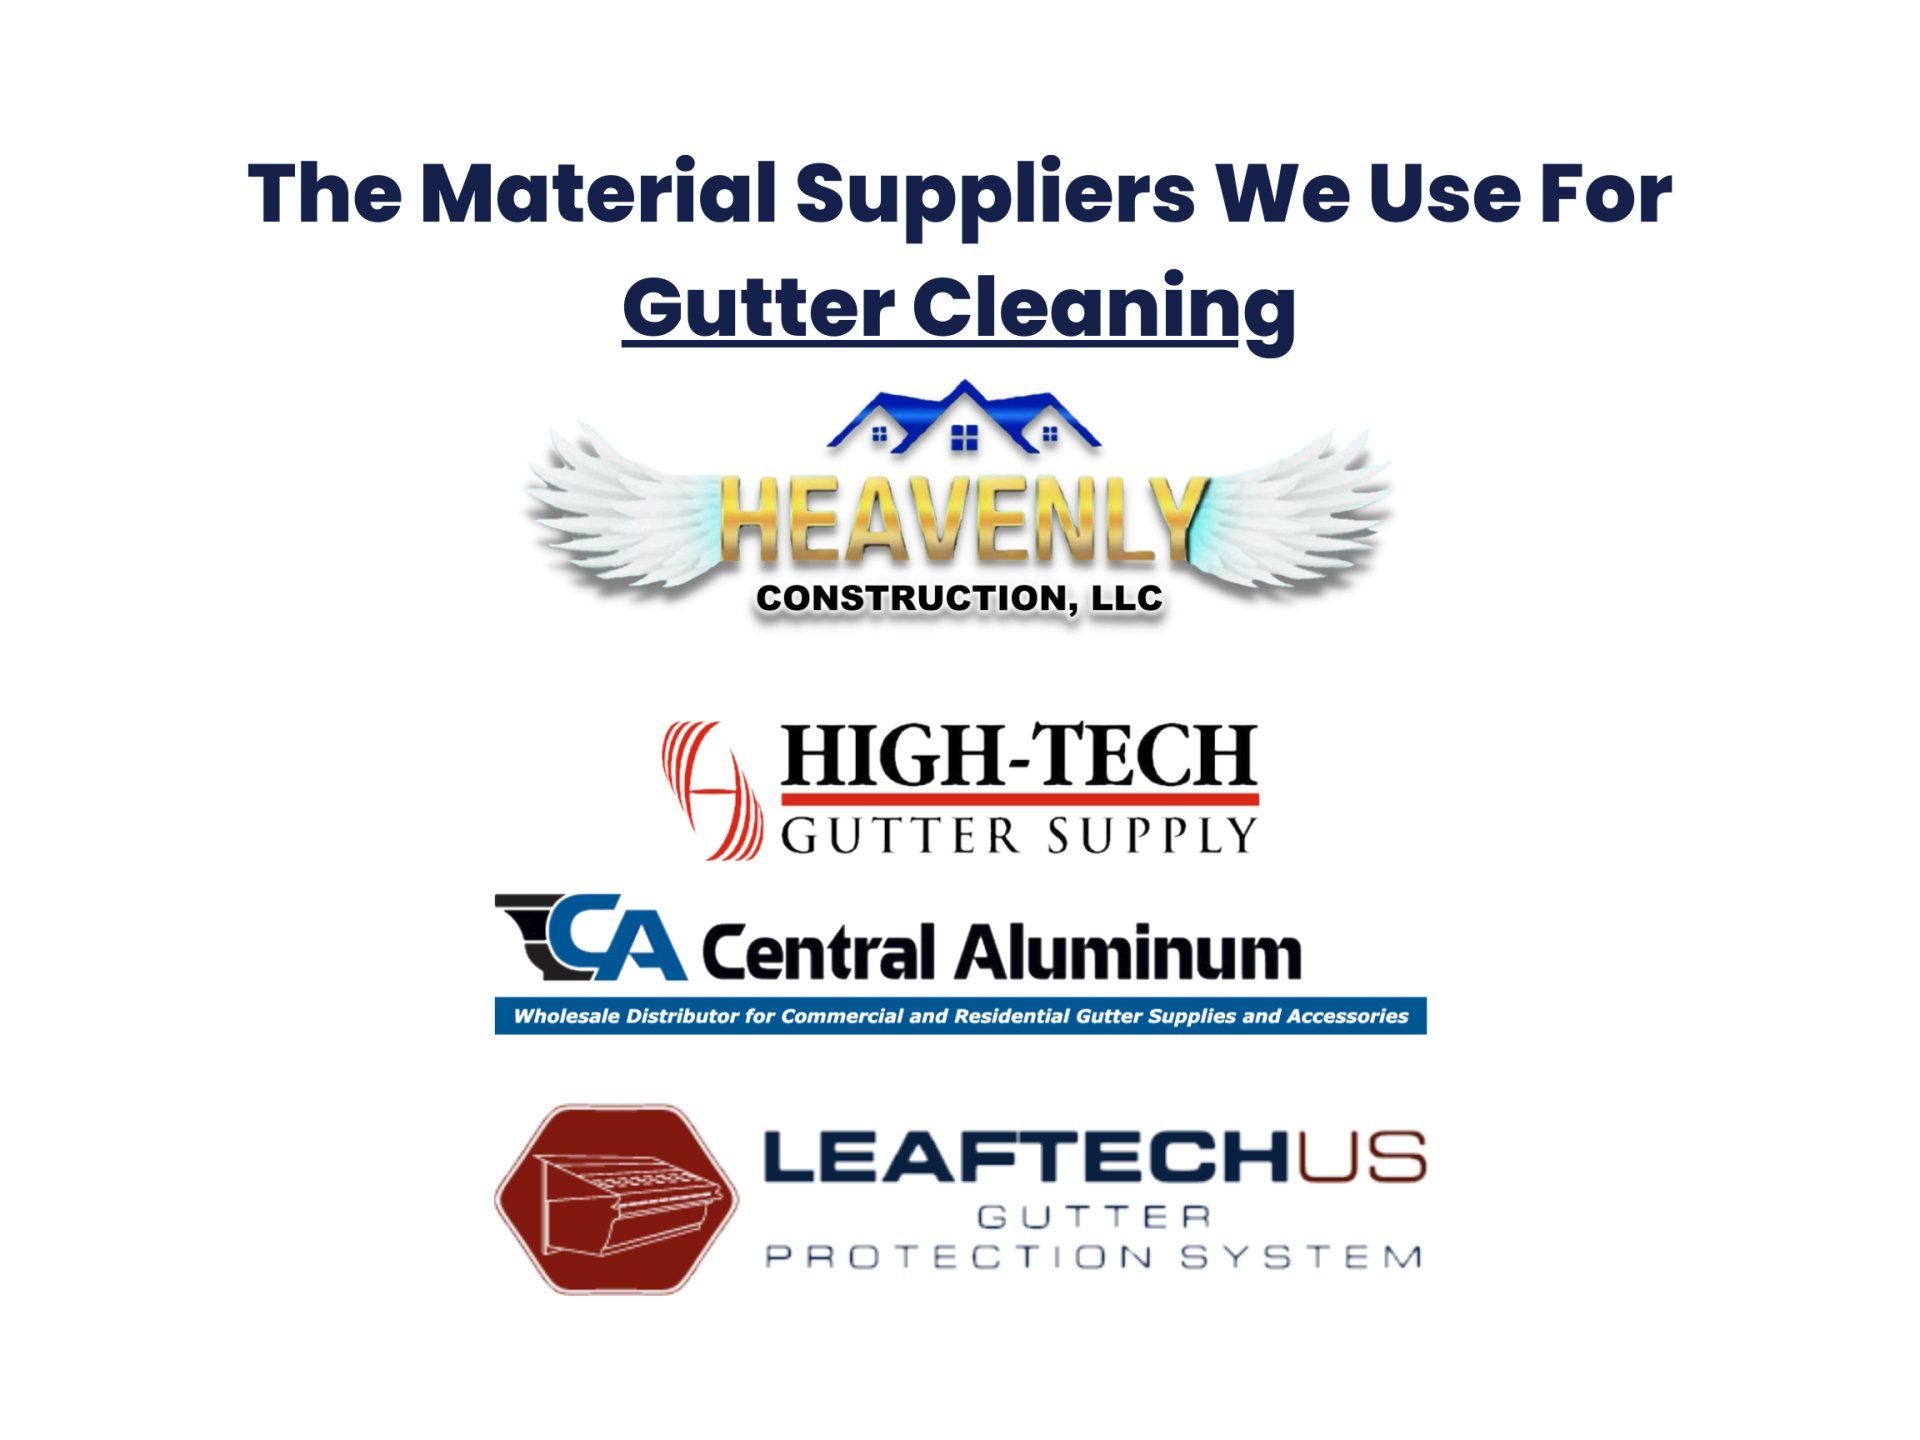 High-Tech Gutter Supply, Central Aluminum, and LEAFTECH US logos.